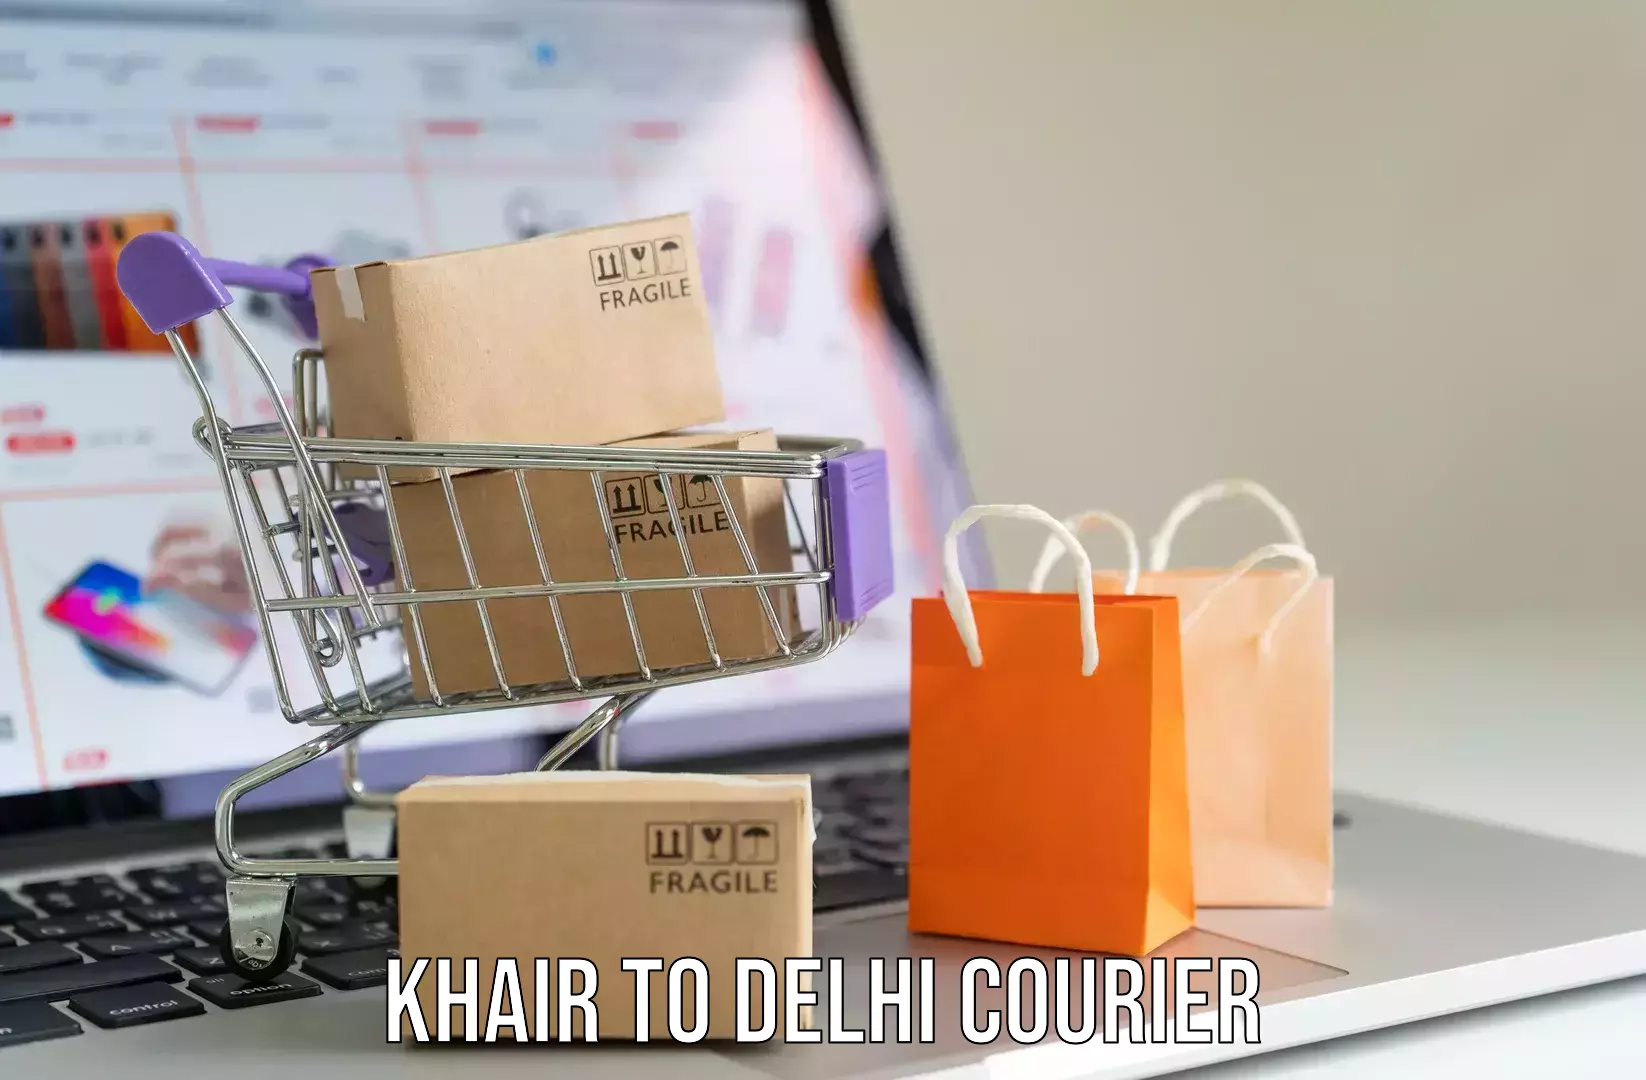 Luggage transport consultancy Khair to NCR